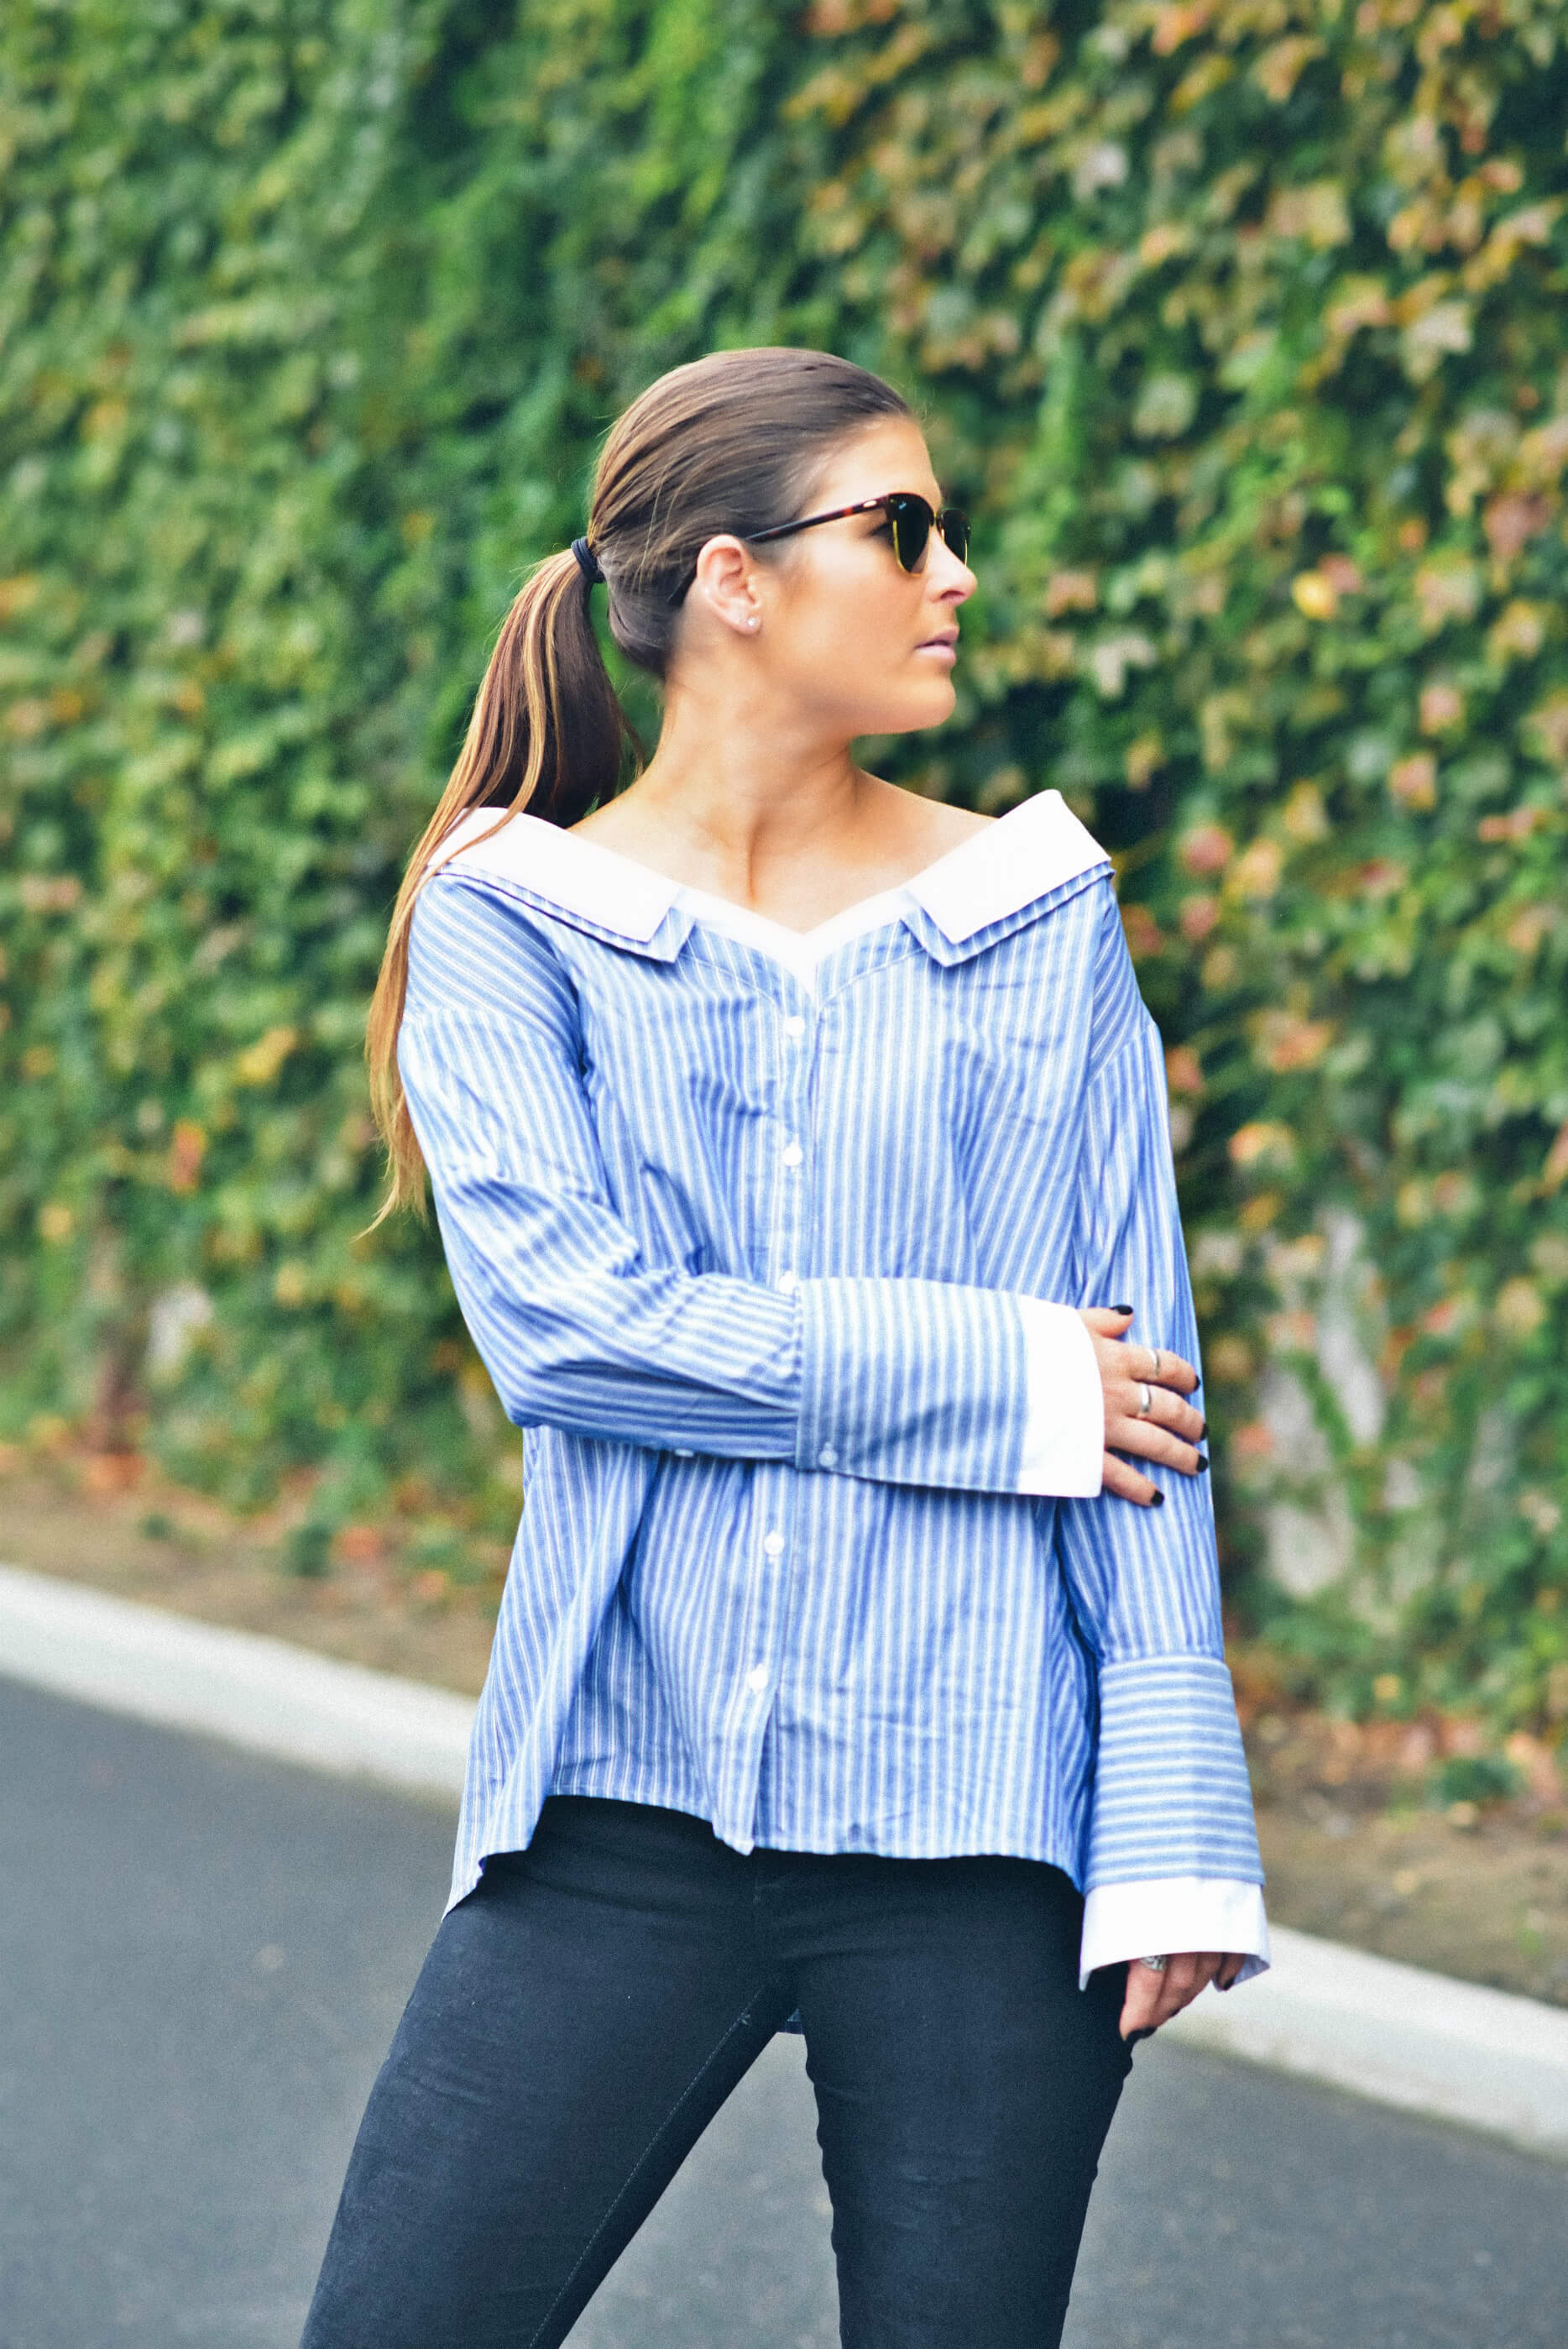 Fall Outfit Inspiration, Blue Striped Blouse, Black Jeans, Tilden of To Bright 